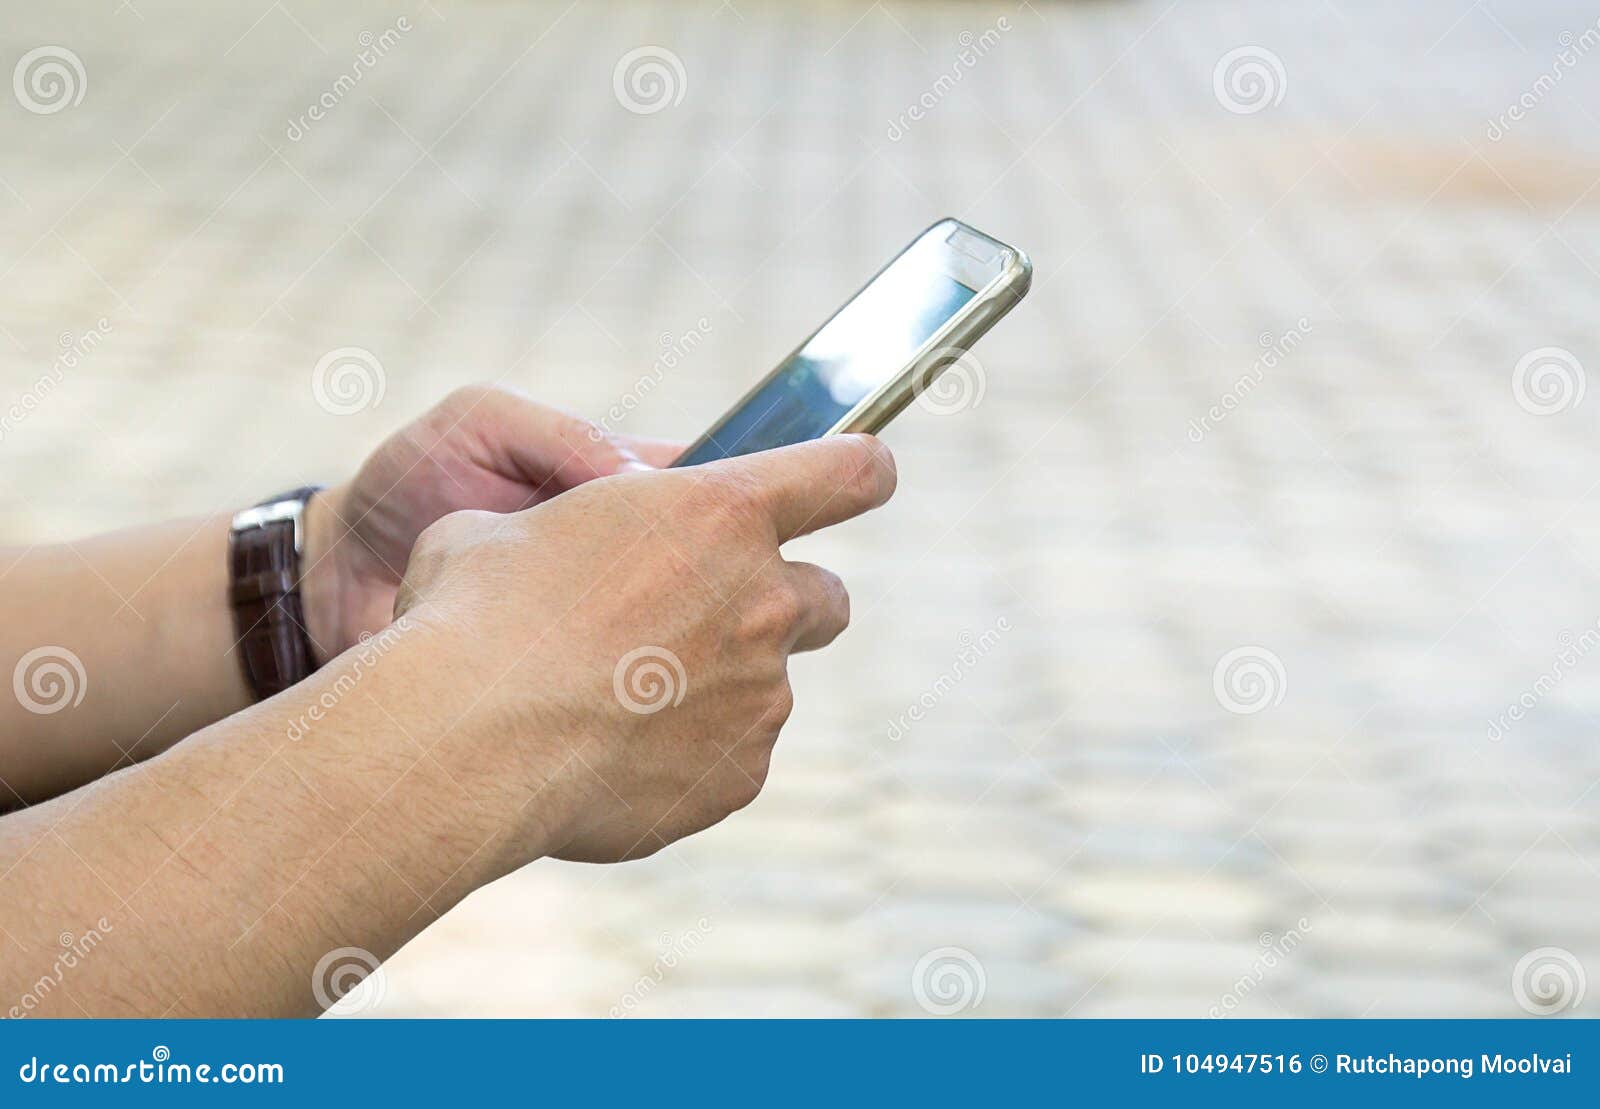 Closeup Business Man Hand Hold Mobile Phone Device Stock Photo - Image ...